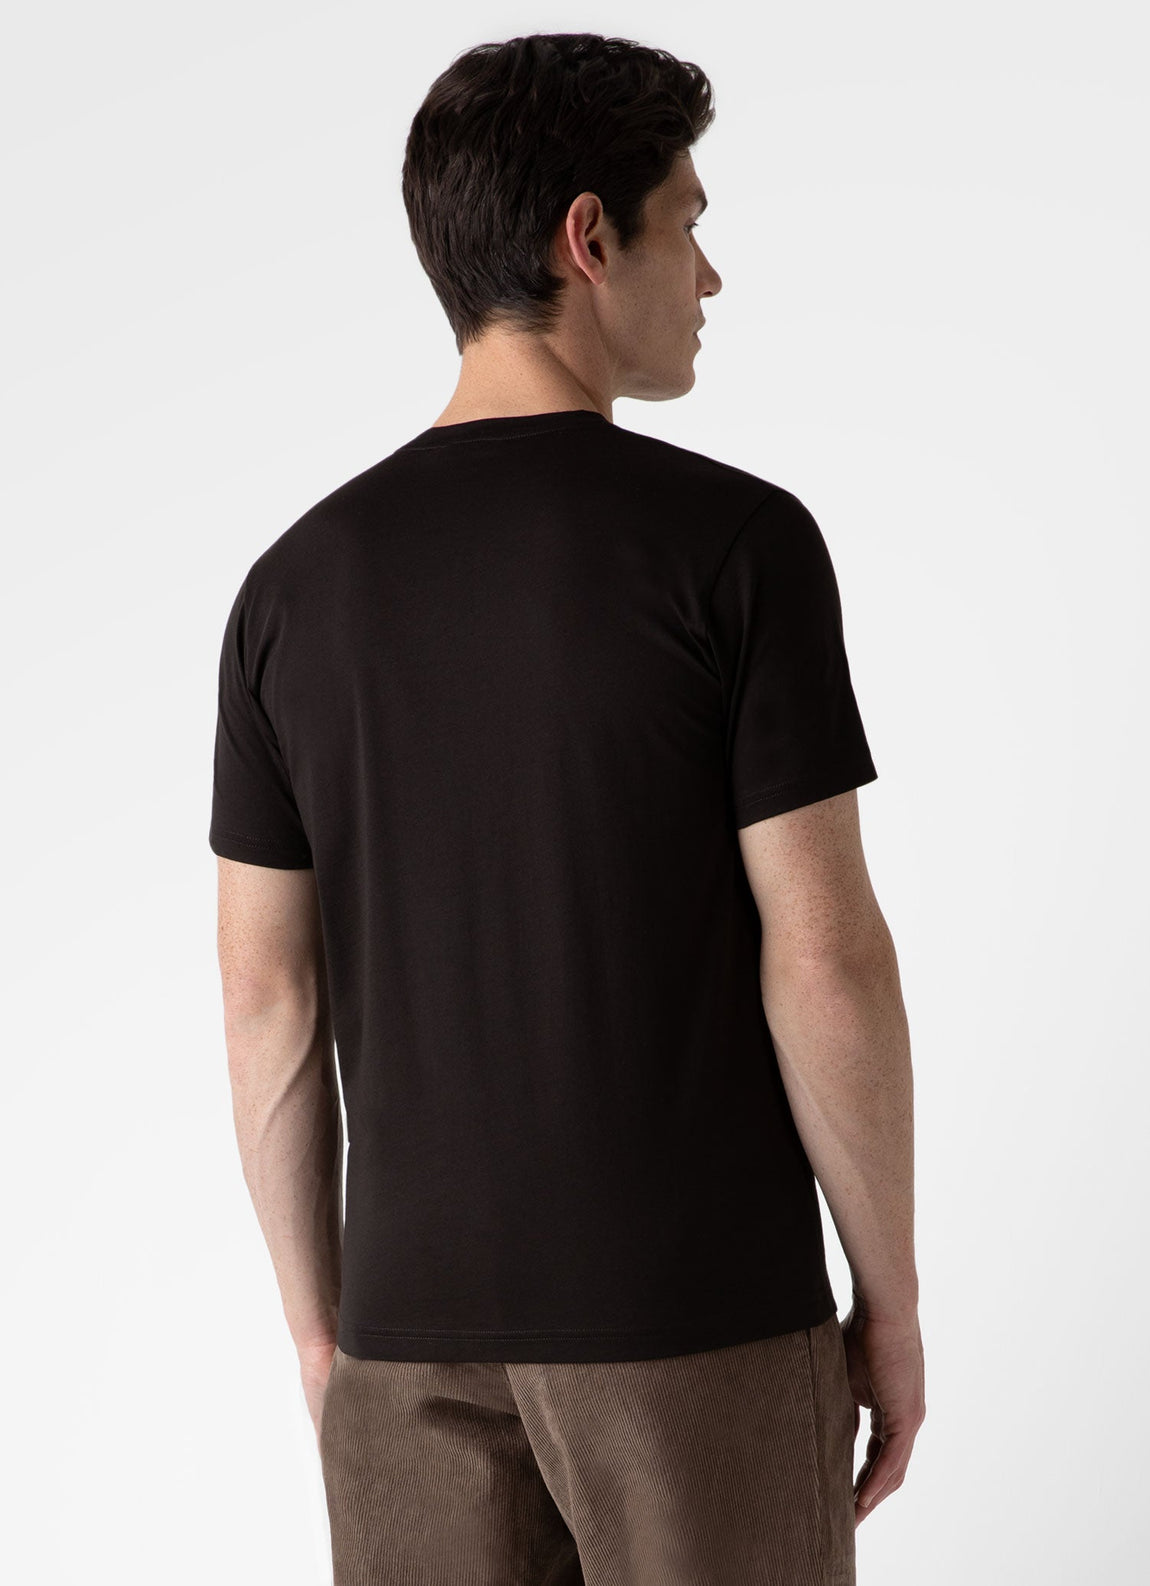 Men's Riviera Midweight T-shirt in Coffee